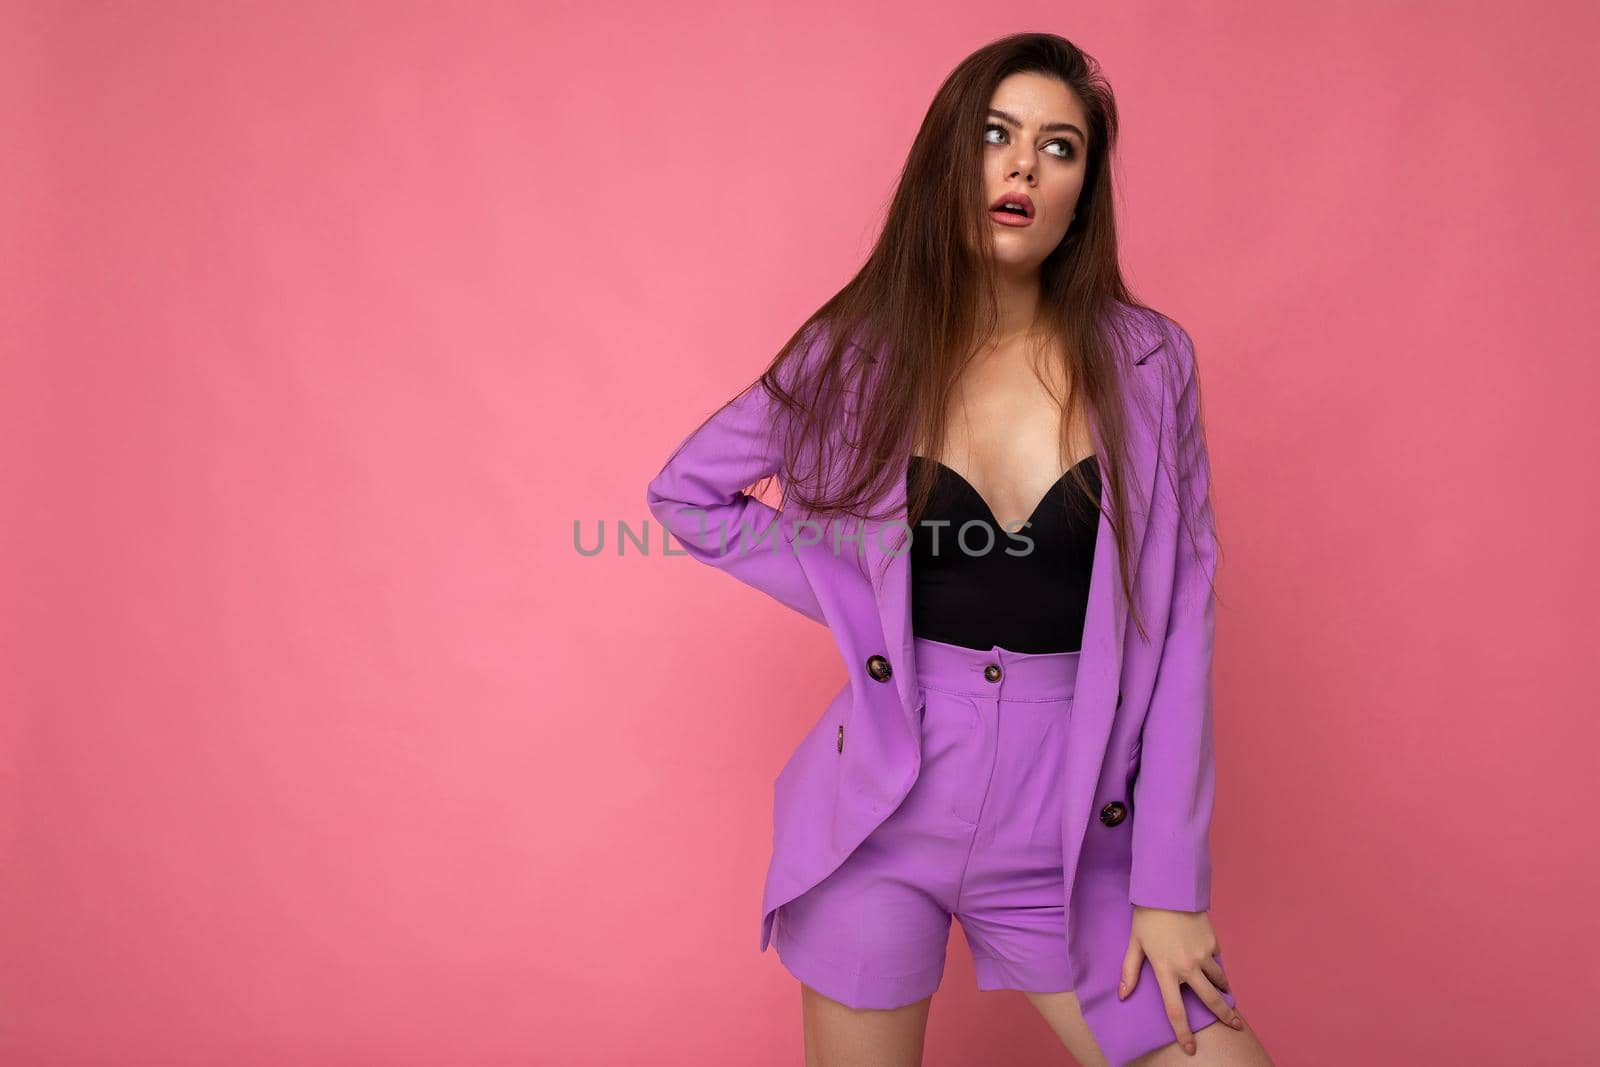 Portrait of young dissatisfied attractive fashionable brunette woman wearing stylish violet suit isolated on pink background with empty space. Business concept.